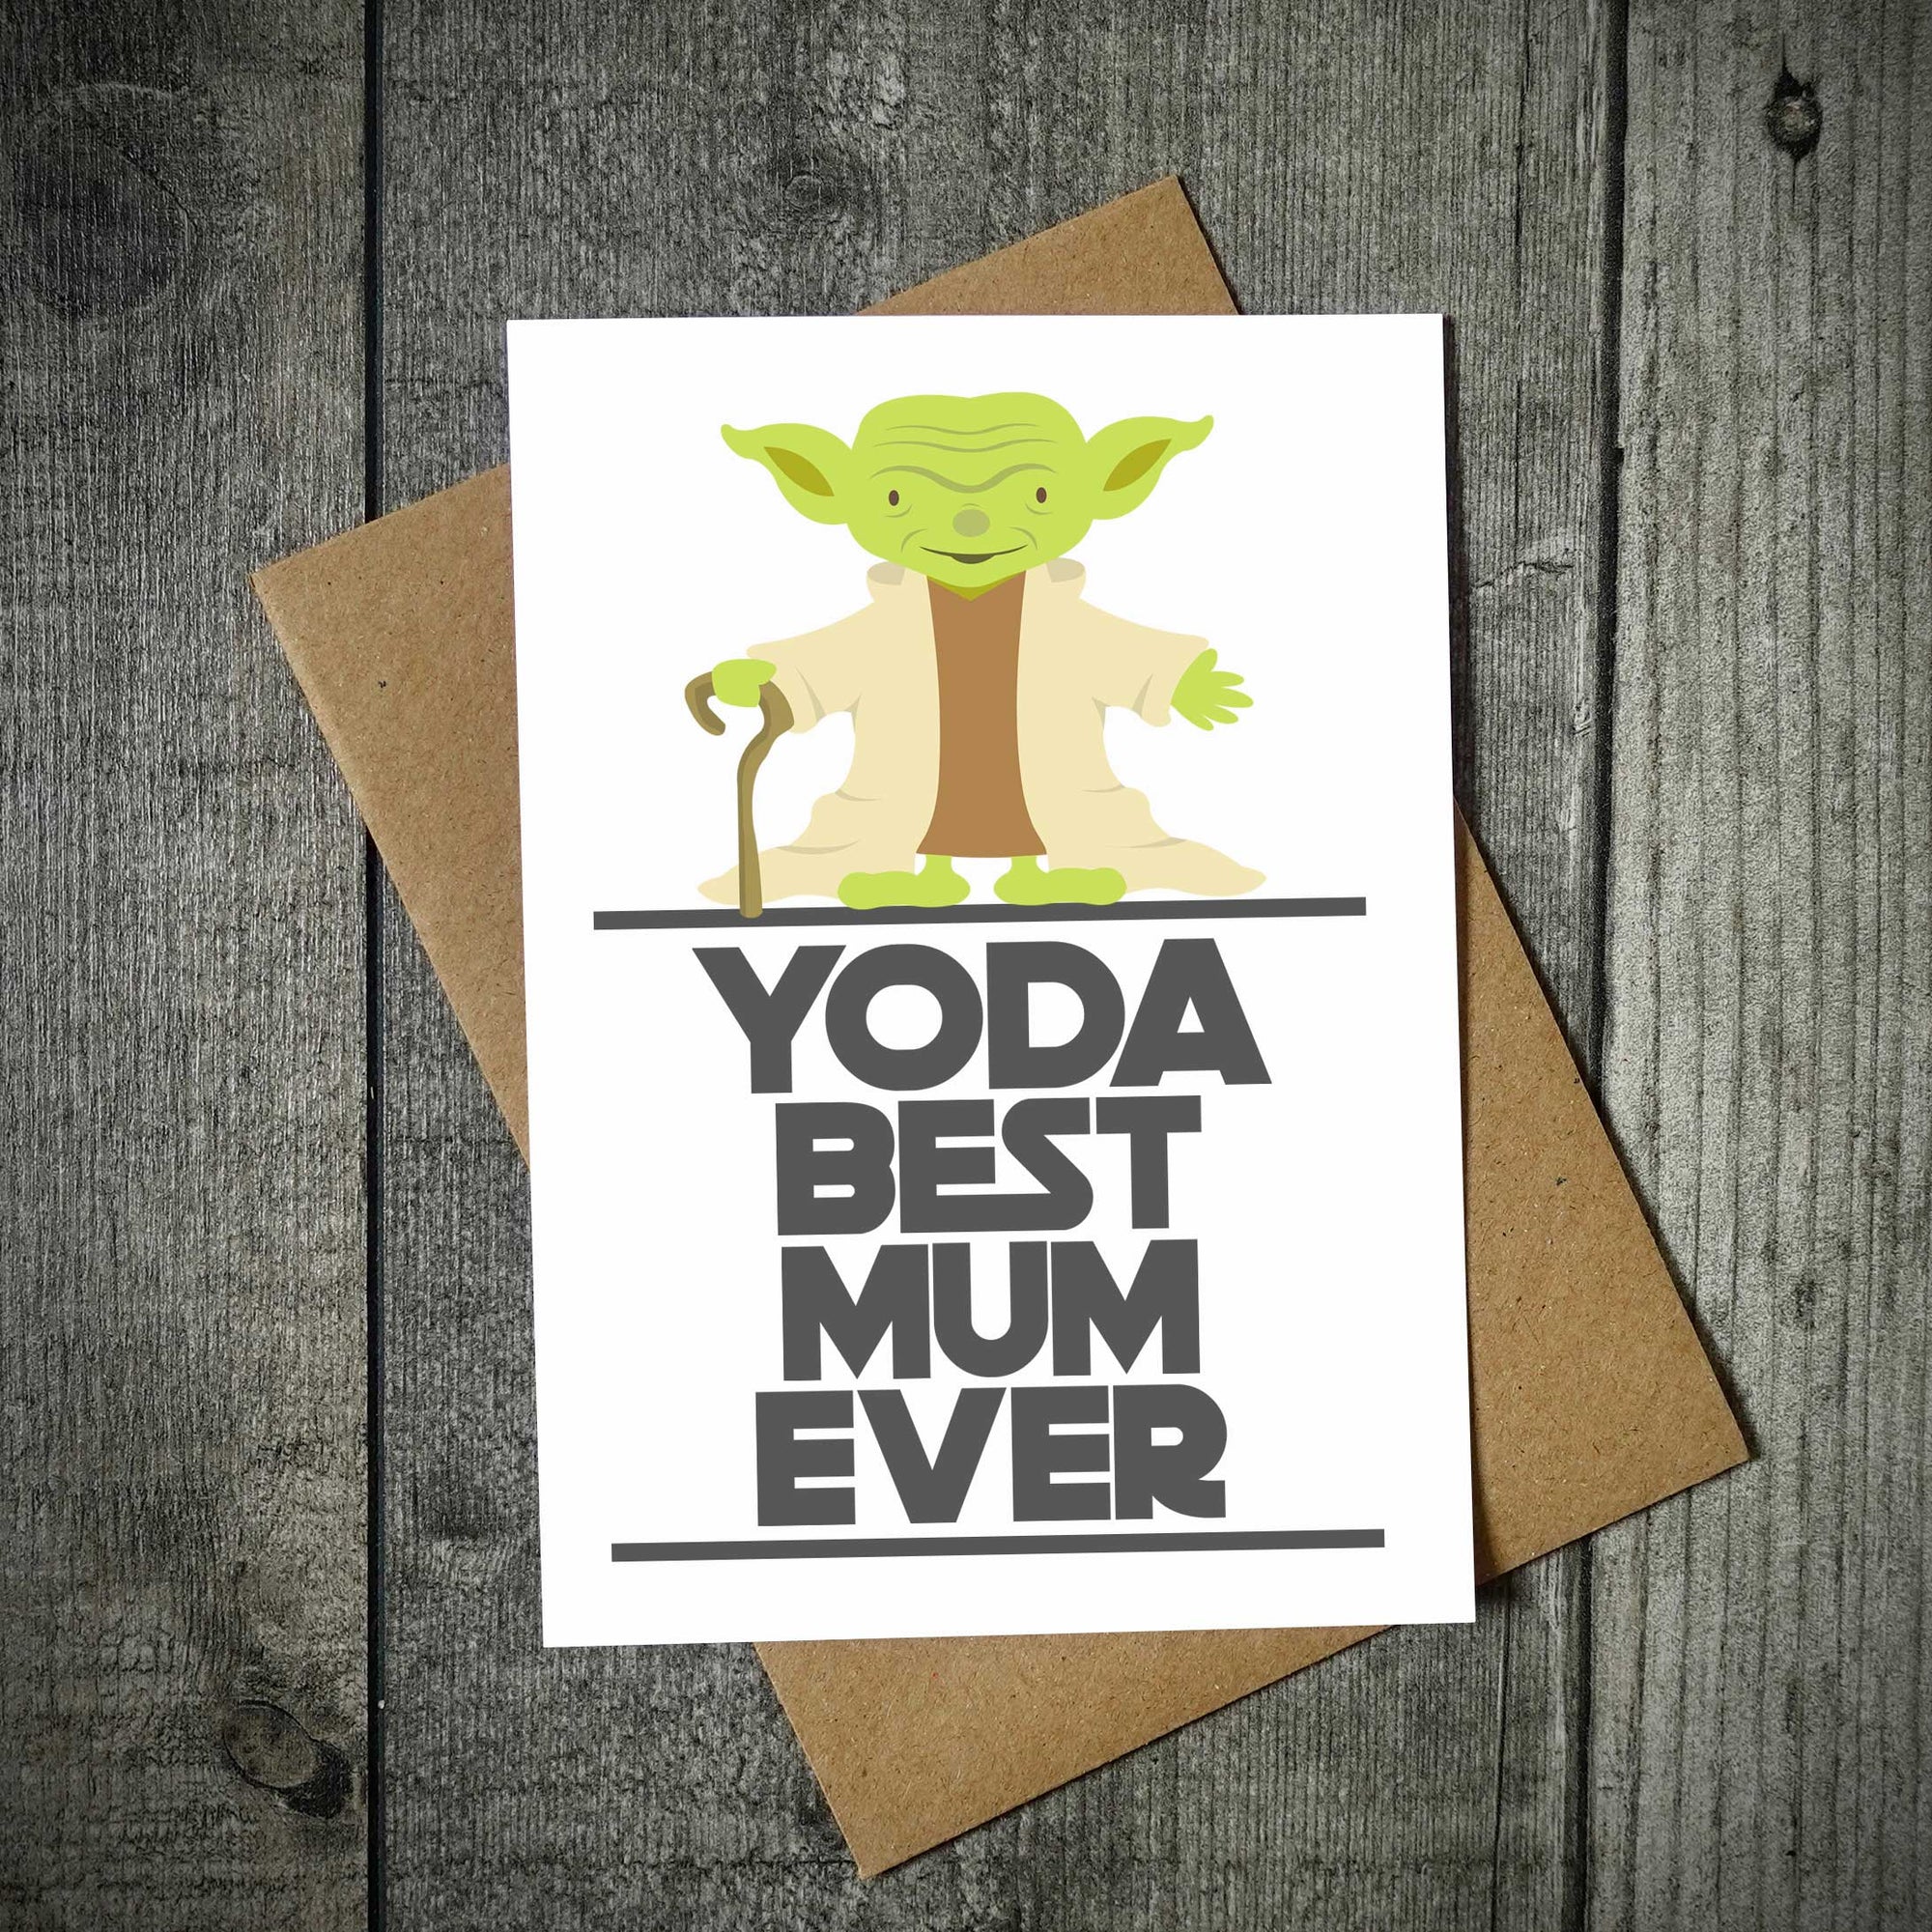 Yoda Best Mum Ever - Mother's Day Card